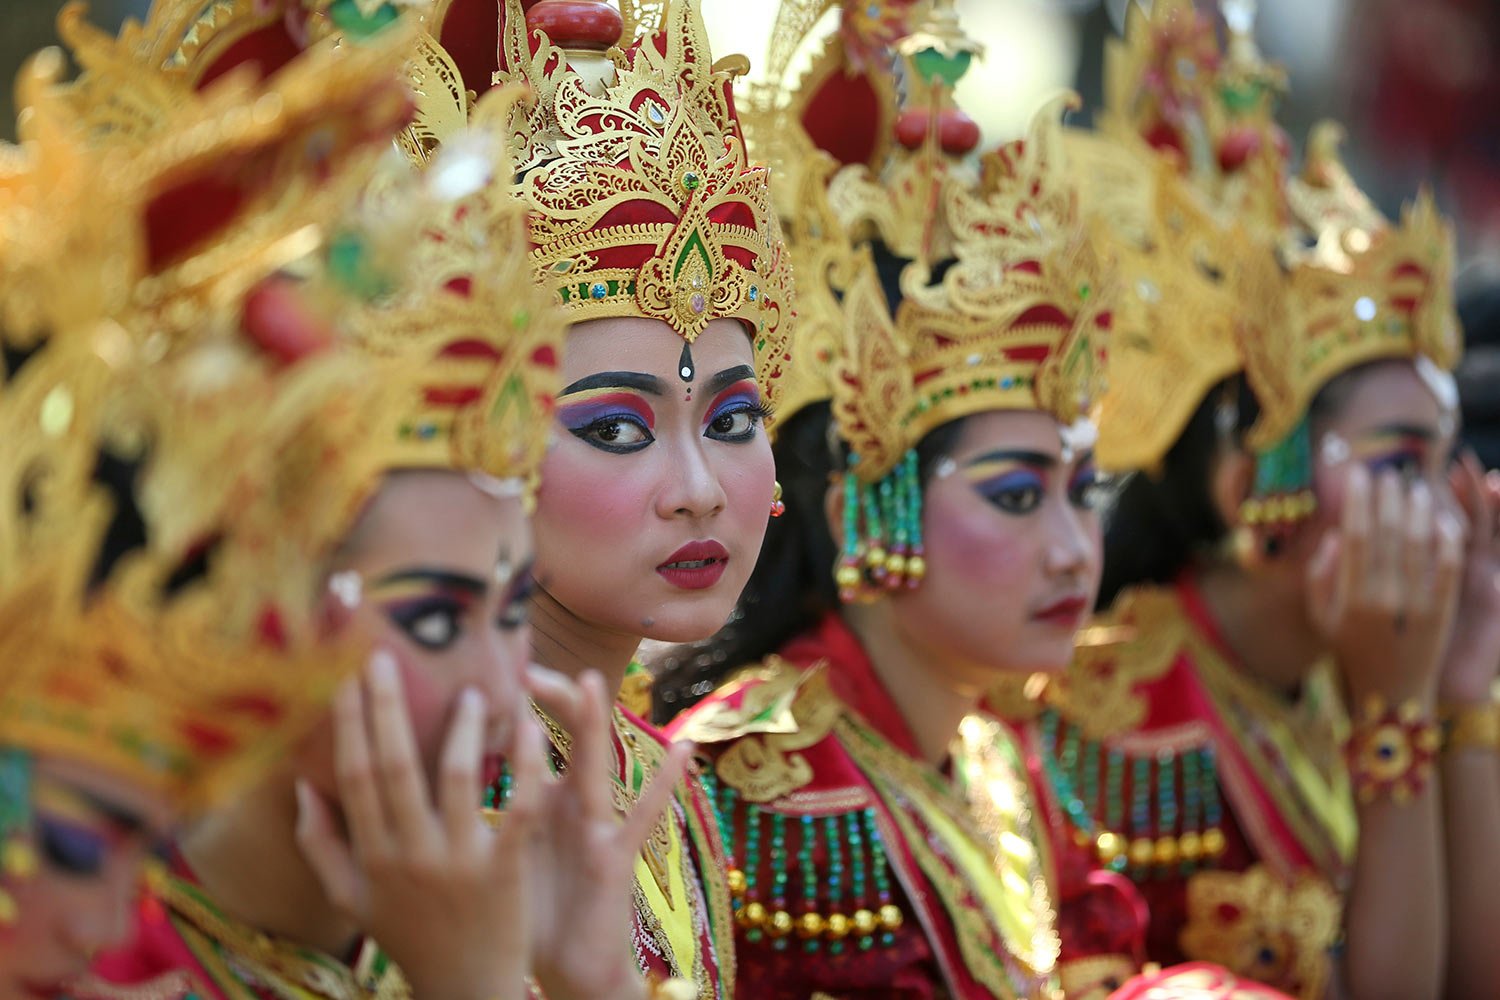  Dancers wait to perform during the opening of Bali Arts Festival in Bali, Indonesia, Sunday, June 18, 2023. (AP Photo/Firdia Lisnawati) 